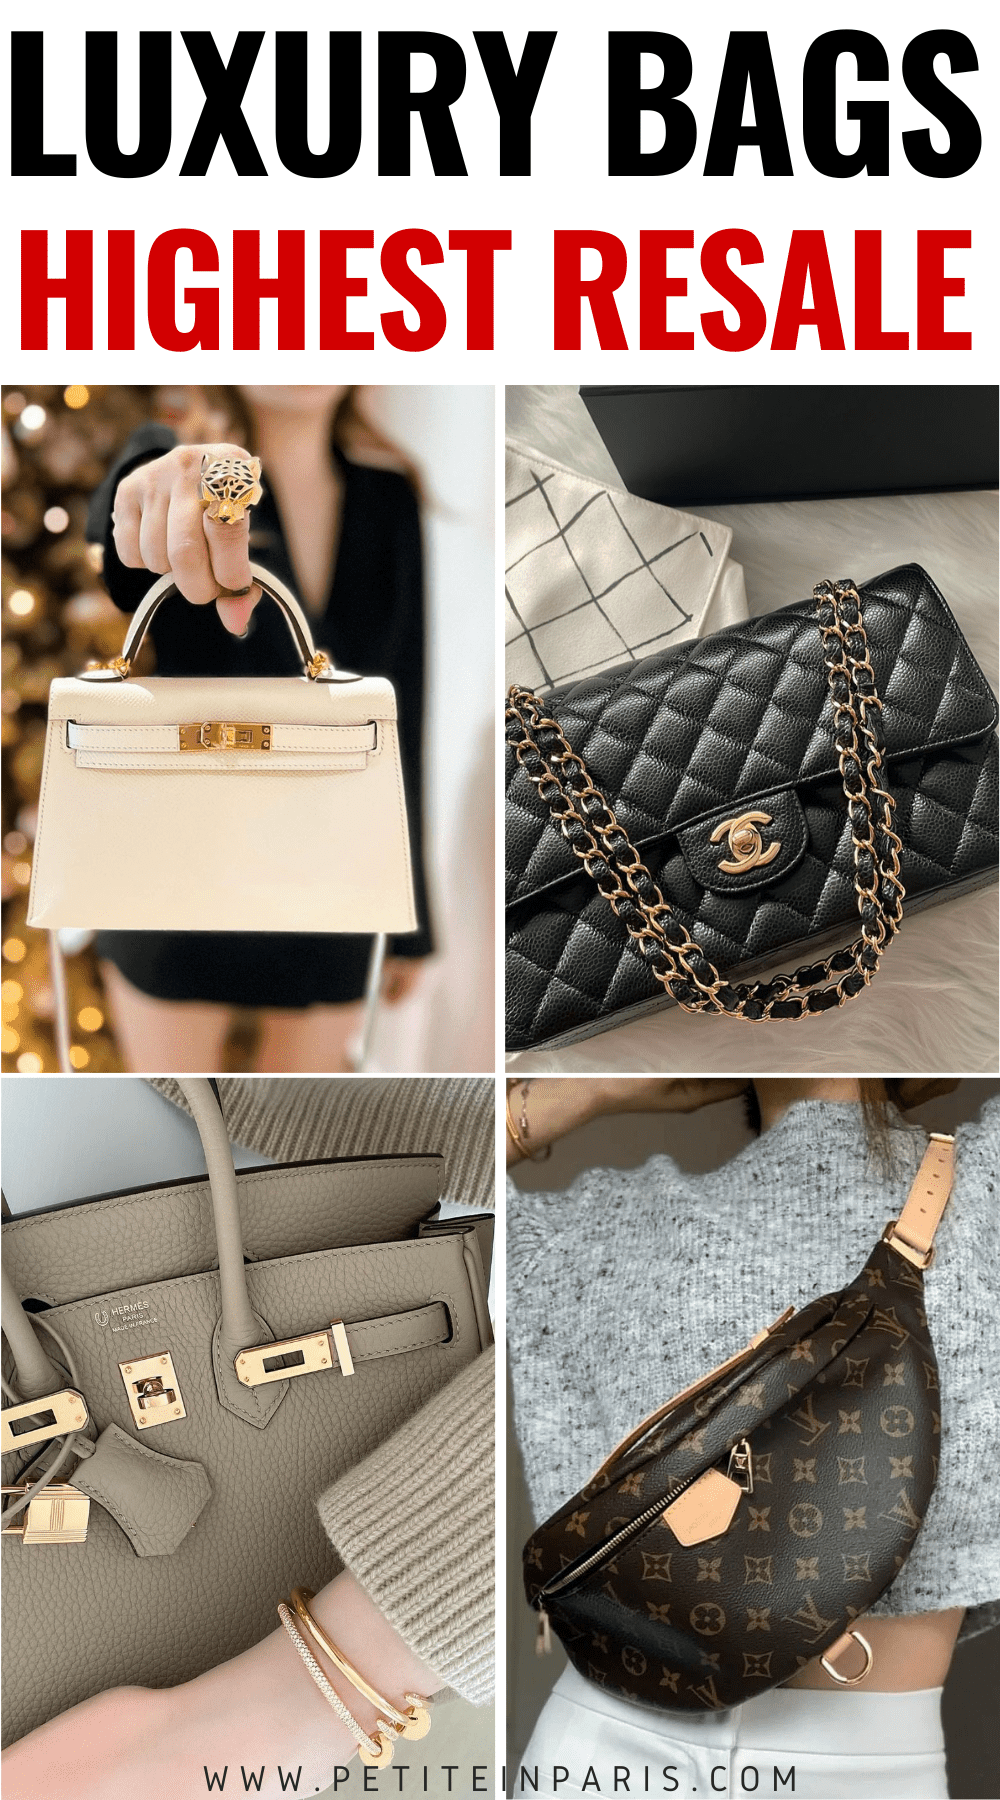 Luxury Bags with the highest resale value